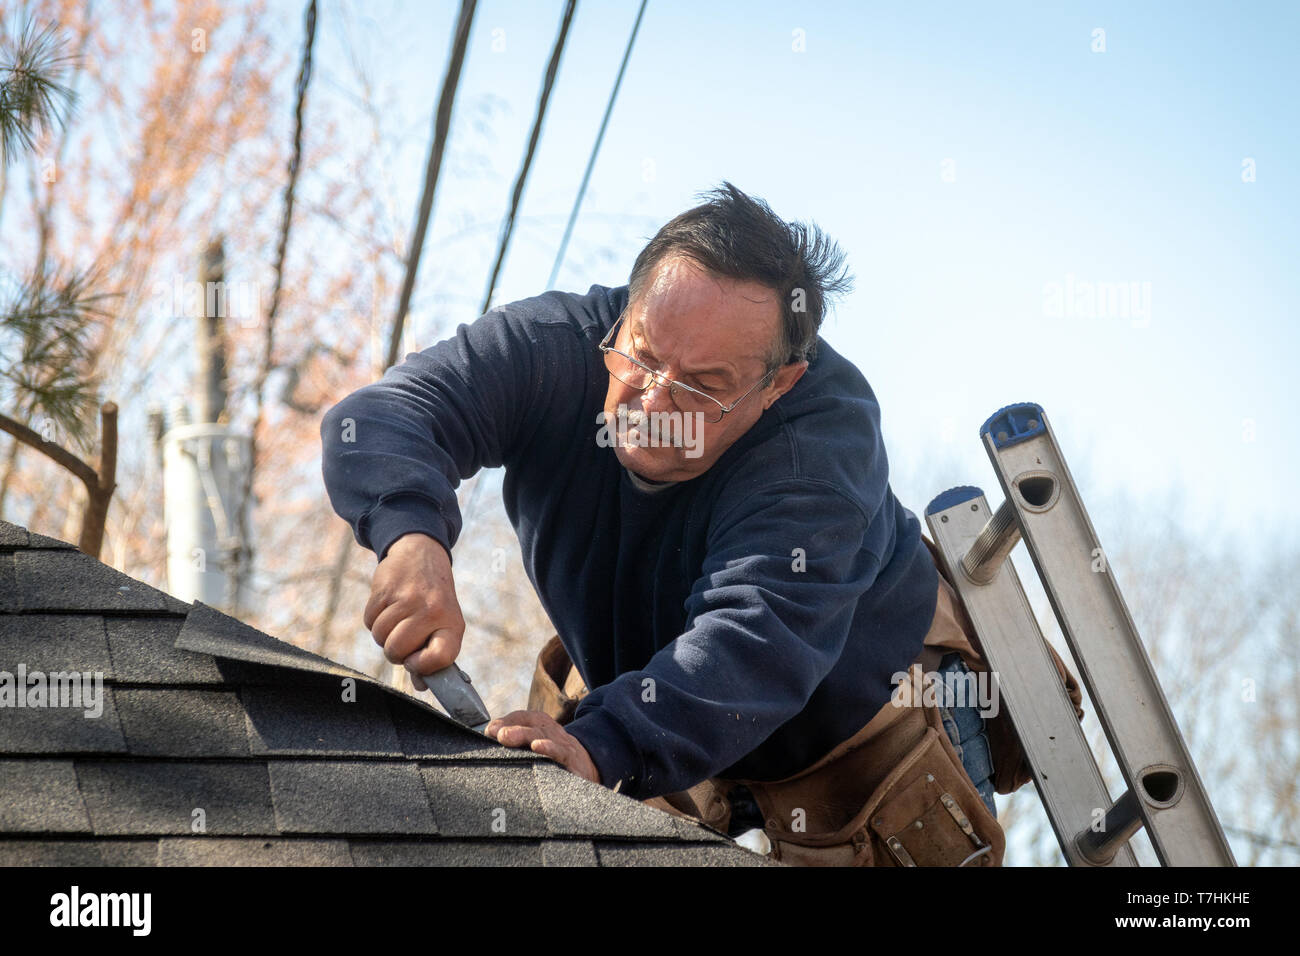 60 years old roofer putting asphalt roof shingles on a house structure Stock Photo